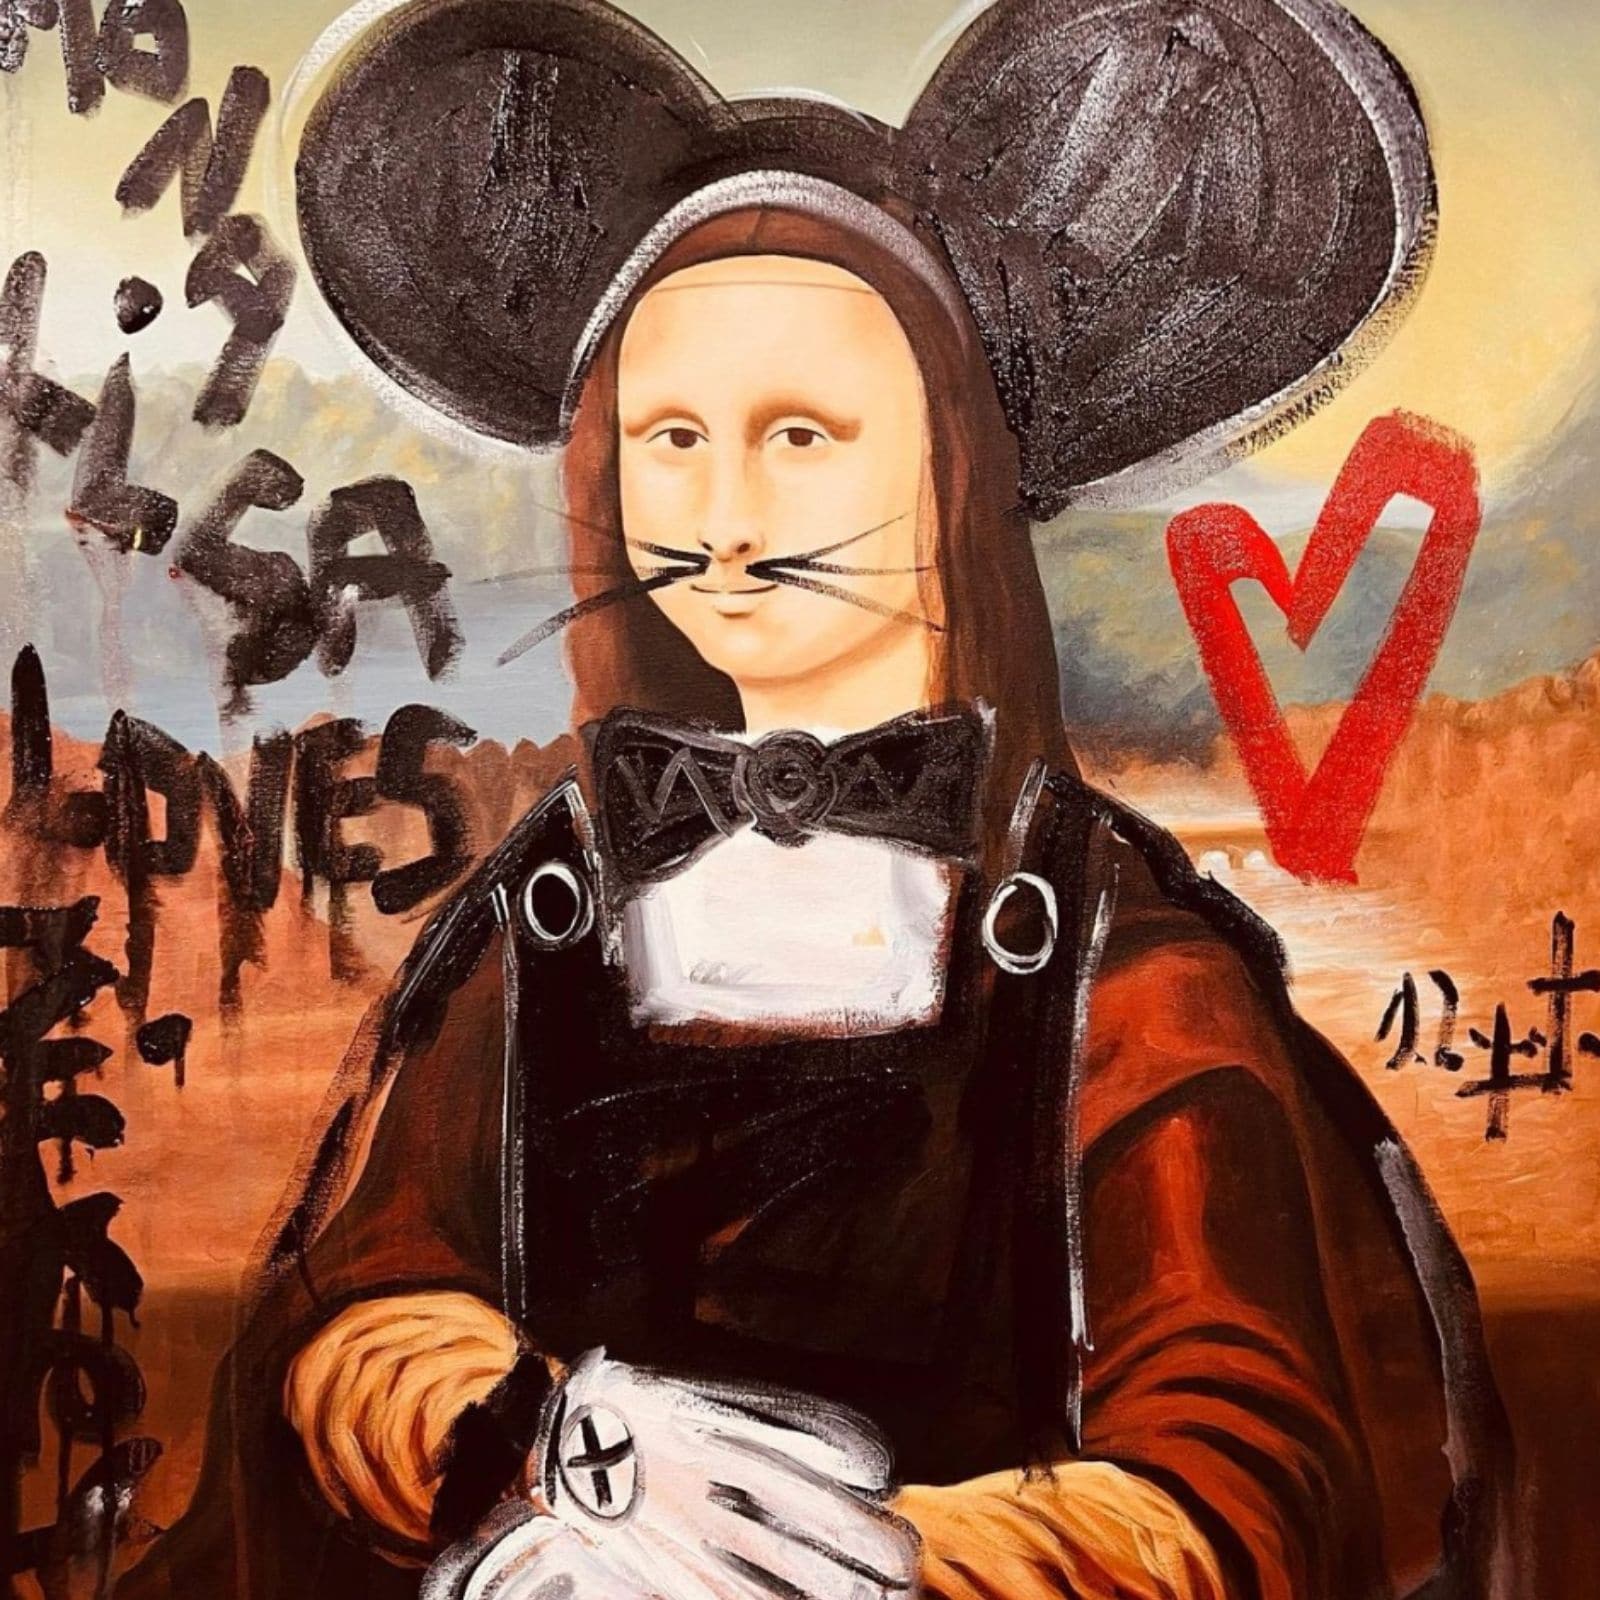 This Artist's Sexual Relationship With the Mona Lisa Involves